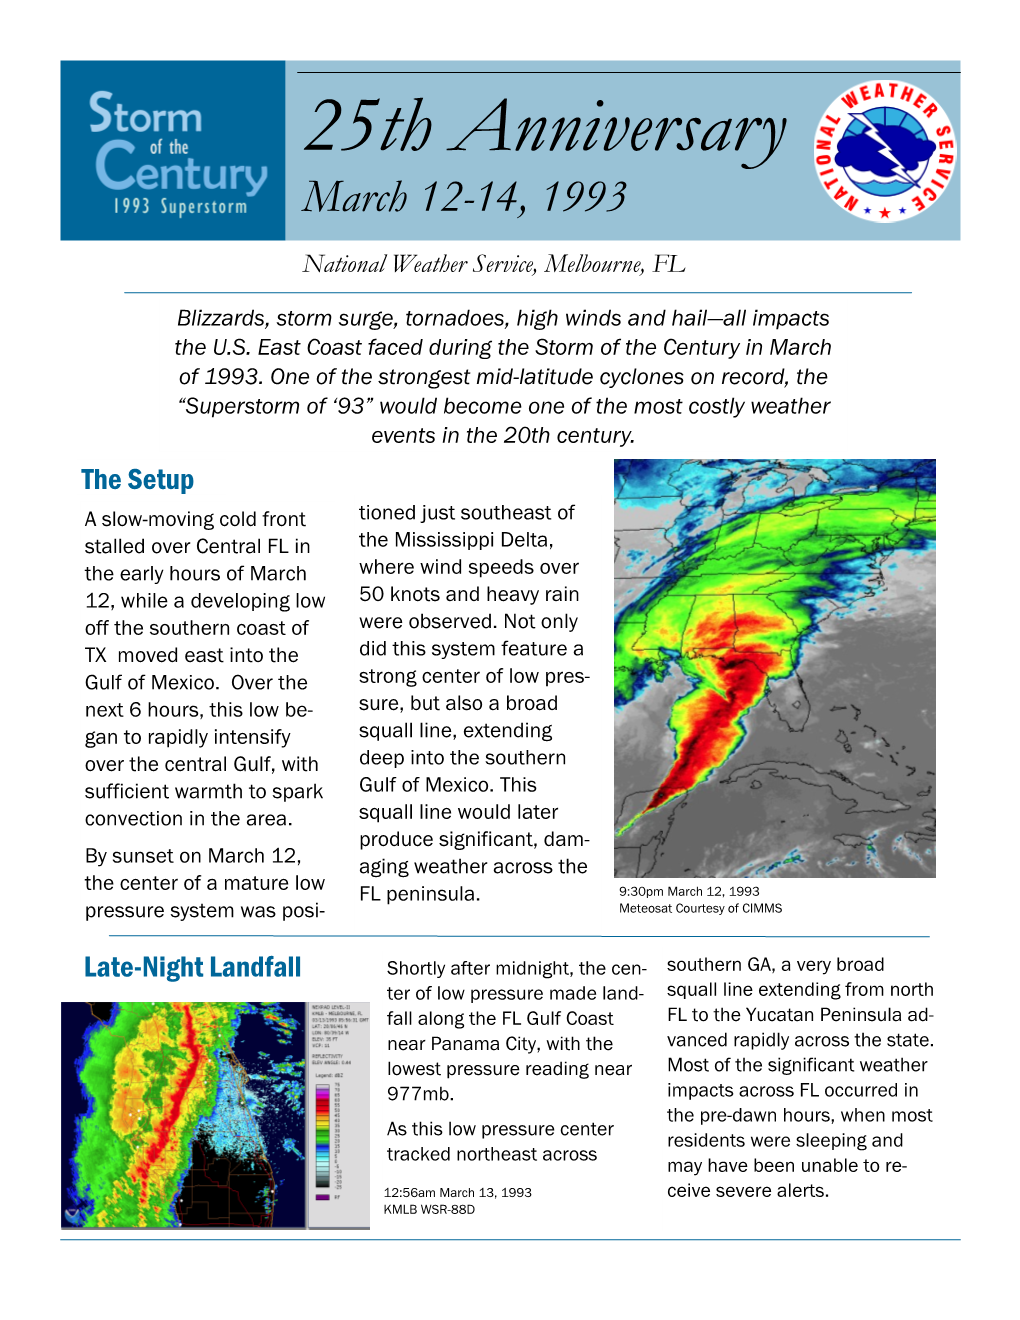 25Th Anniversary of the March 1993 "Storm of the Century"